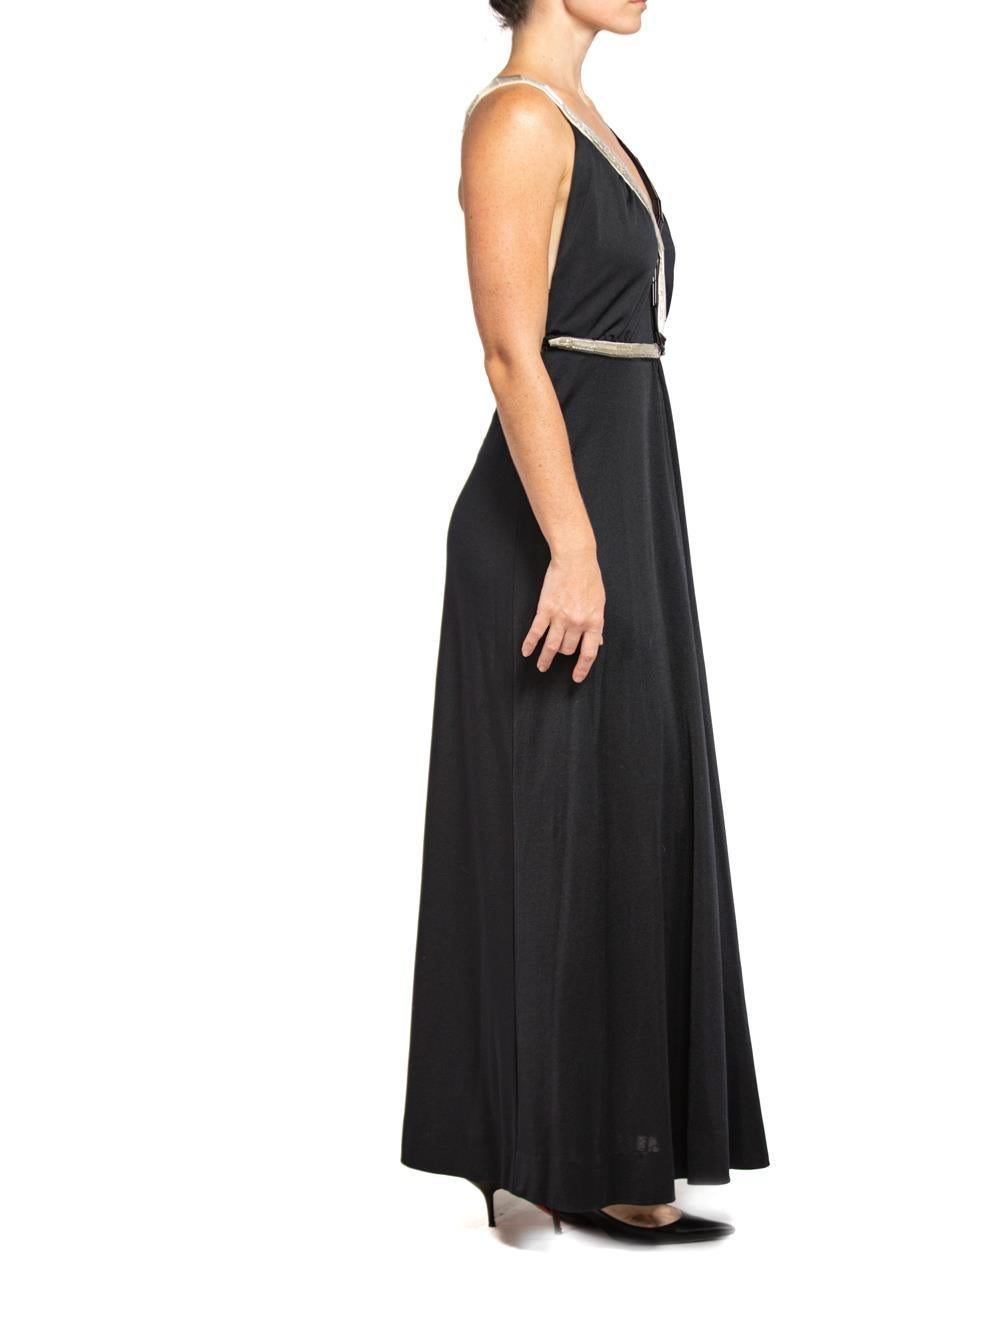 Women's 1970S LORIS AZZARO Black & White Polyester Jersey Backless Gown For Sale